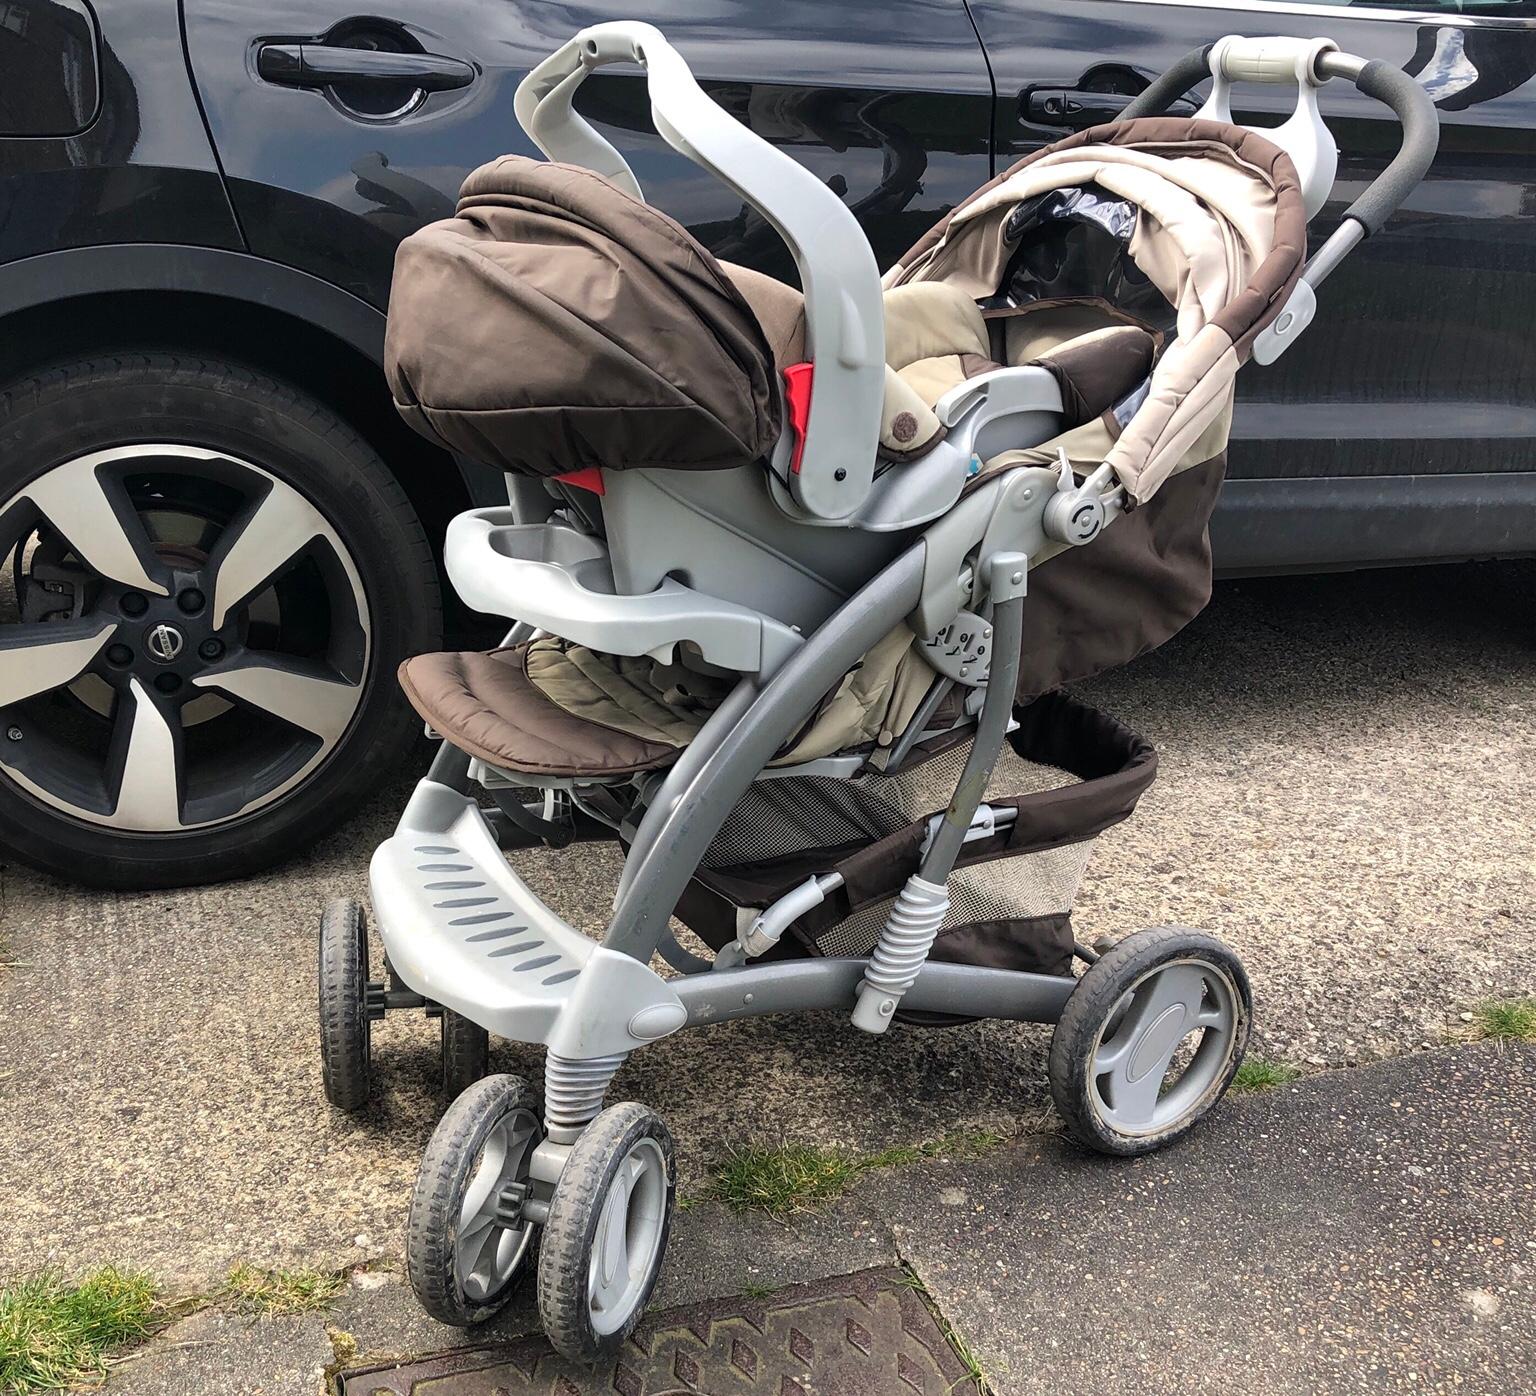 travel system mothercare